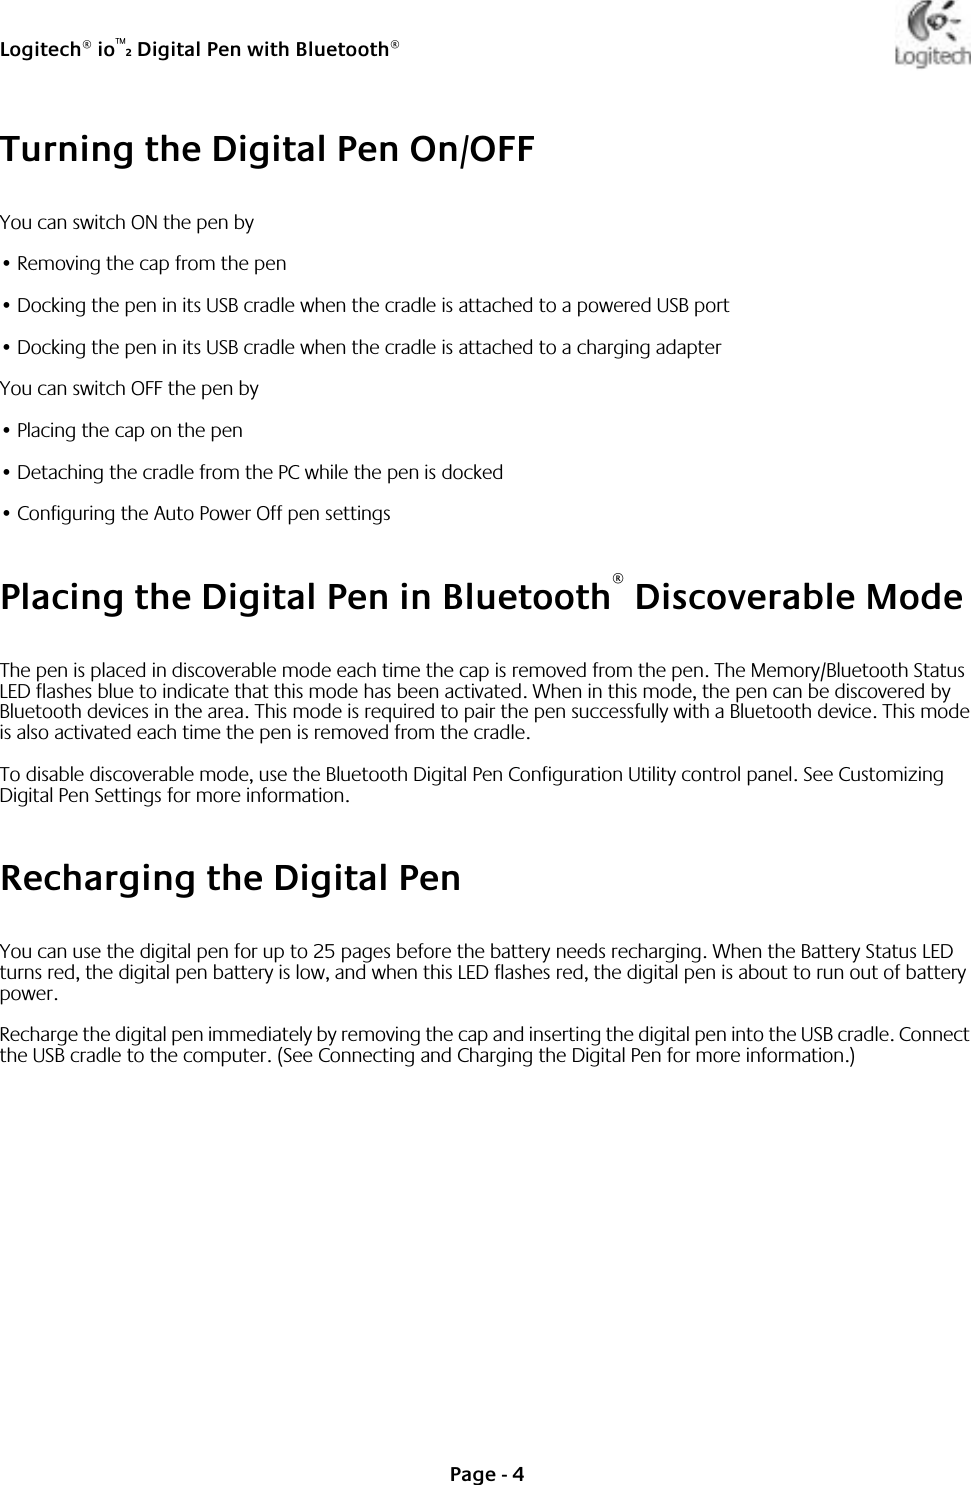 Logitech® io™2 Digital Pen with Bluetooth®Page - 4Turning the Digital Pen On/OFFYou can switch ON the pen by•Removing the cap from the pen•Docking the pen in its USB cradle when the cradle is attached to a powered USB port•Docking the pen in its USB cradle when the cradle is attached to a charging adapterYou can switch OFF the pen by•Placing the cap on the pen•Detaching the cradle from the PC while the pen is docked•Configuring the Auto Power Off pen settingsPlacing the Digital Pen in Bluetooth® Discoverable ModeThe pen is placed in discoverable mode each time the cap is removed from the pen. The Memory/Bluetooth Status LED flashes blue to indicate that this mode has been activated. When in this mode, the pen can be discovered by Bluetooth devices in the area. This mode is required to pair the pen successfully with a Bluetooth device. This mode is also activated each time the pen is removed from the cradle. To disable discoverable mode, use the Bluetooth Digital Pen Configuration Utility control panel. See Customizing Digital Pen Settings for more information.Recharging the Digital PenYou can use the digital pen for up to 25 pages before the battery needs recharging. When the Battery Status LED turns red, the digital pen battery is low, and when this LED flashes red, the digital pen is about to run out of battery power. Recharge the digital pen immediately by removing the cap and inserting the digital pen into the USB cradle. Connect the USB cradle to the computer. (See Connecting and Charging the Digital Pen for more information.) 